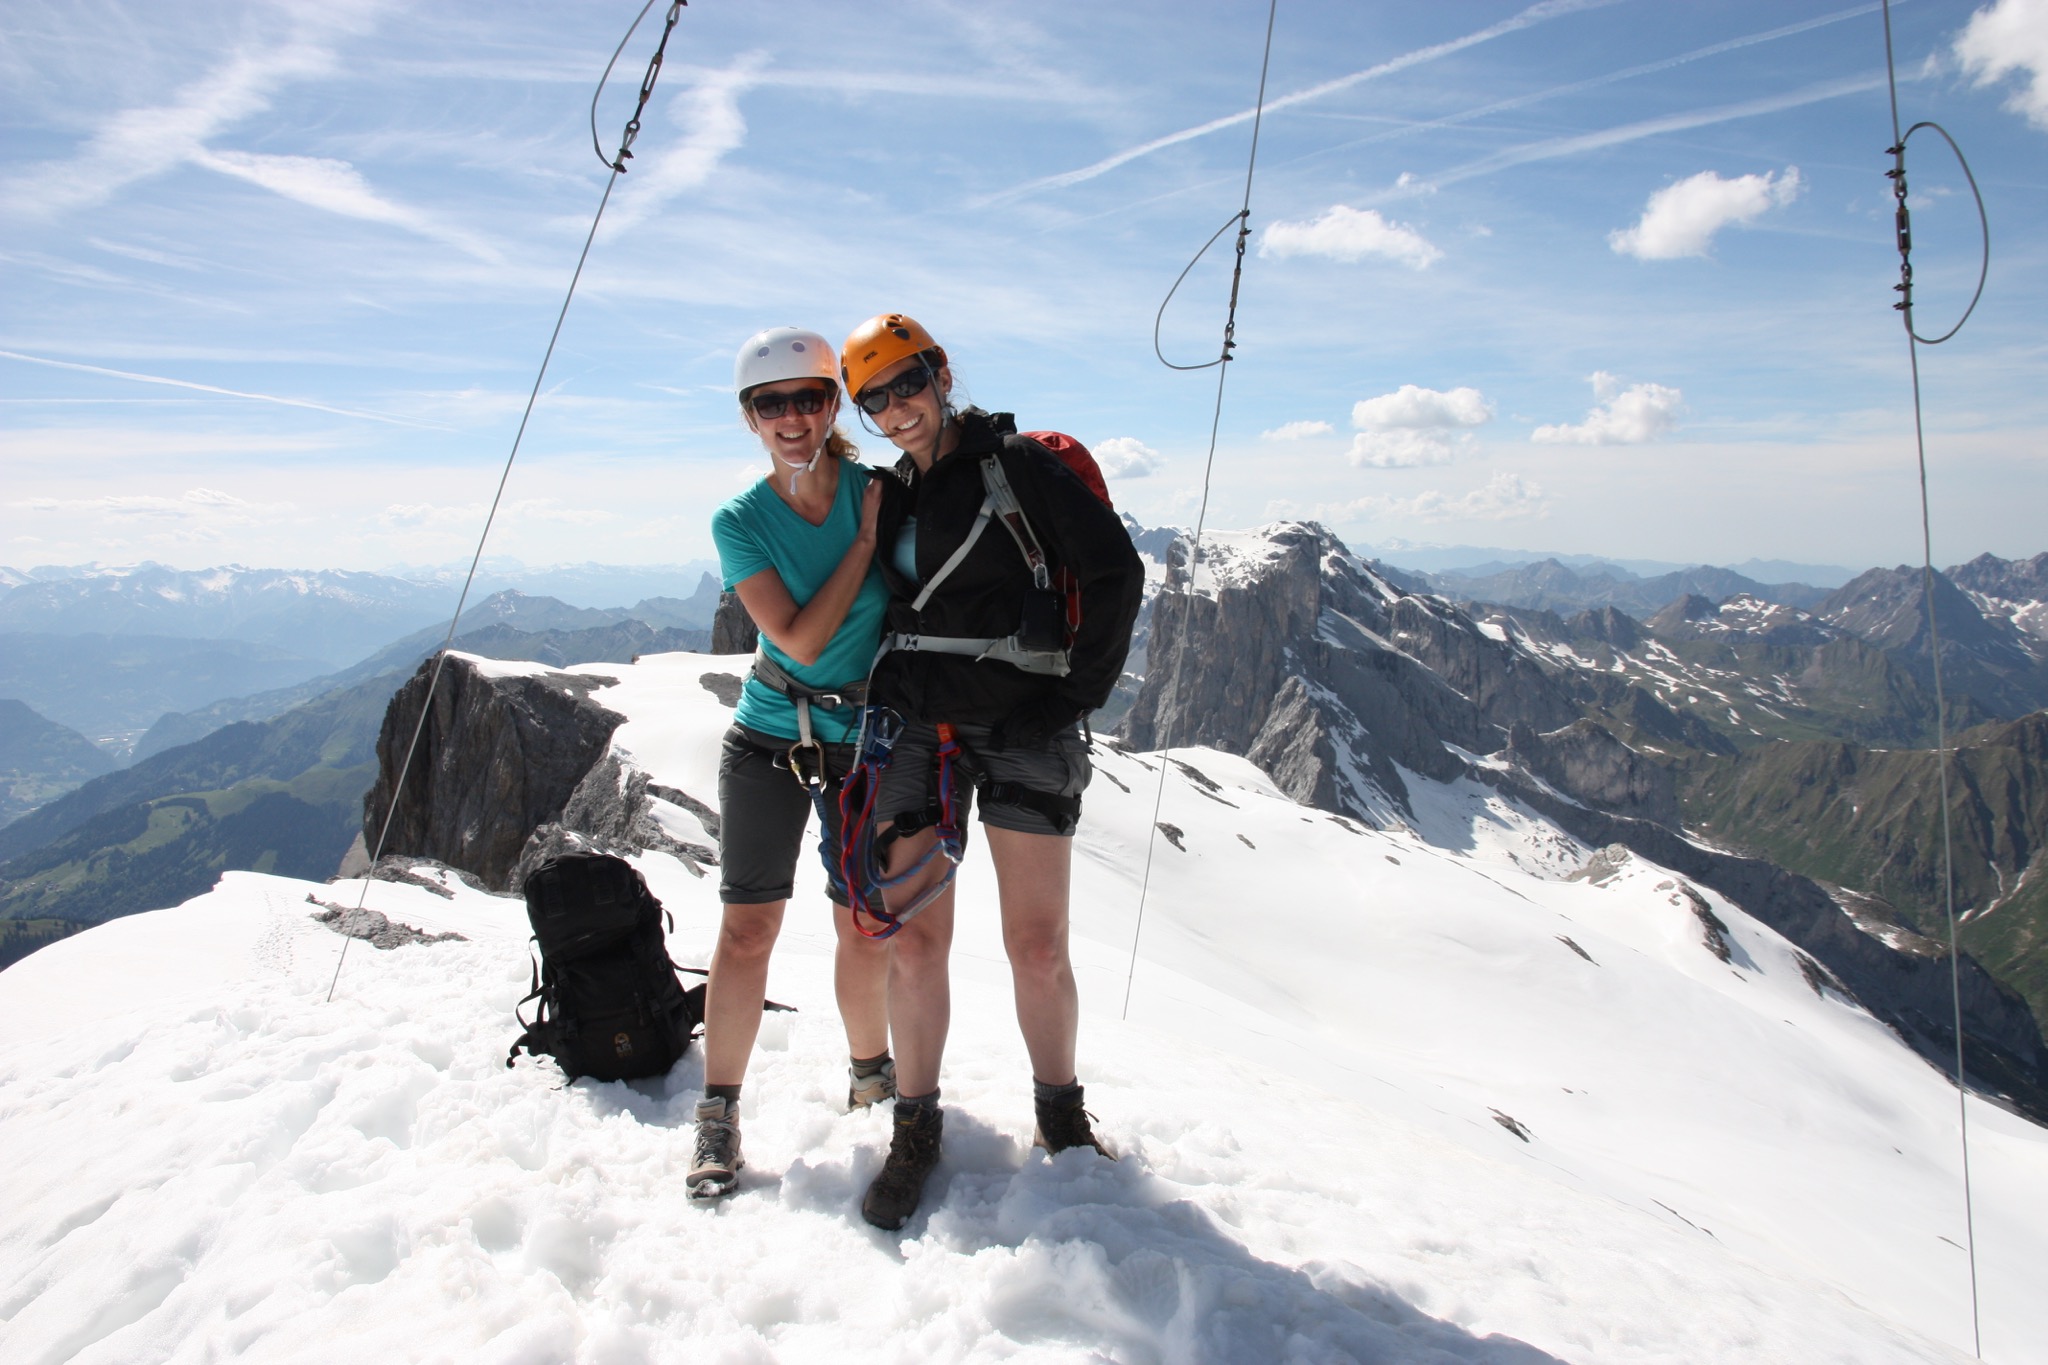 Tanja and Denise at the summit of Sulzfluh (2820m)